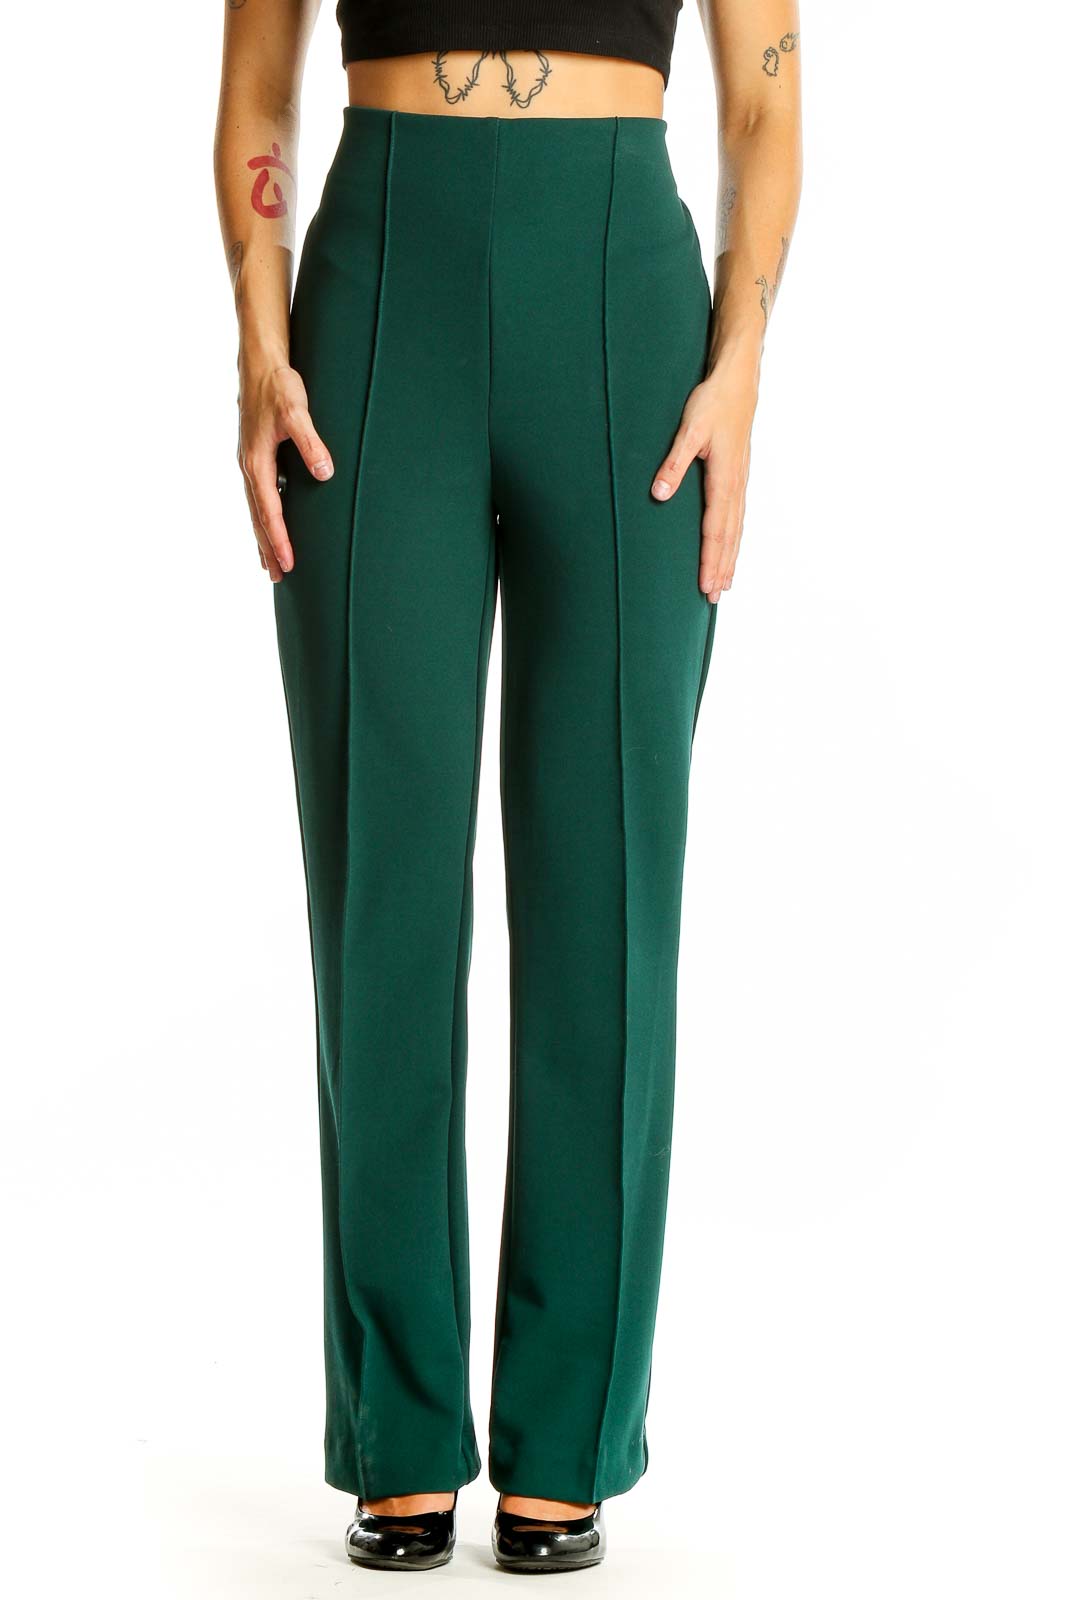 Green Straight Solid Pants Front